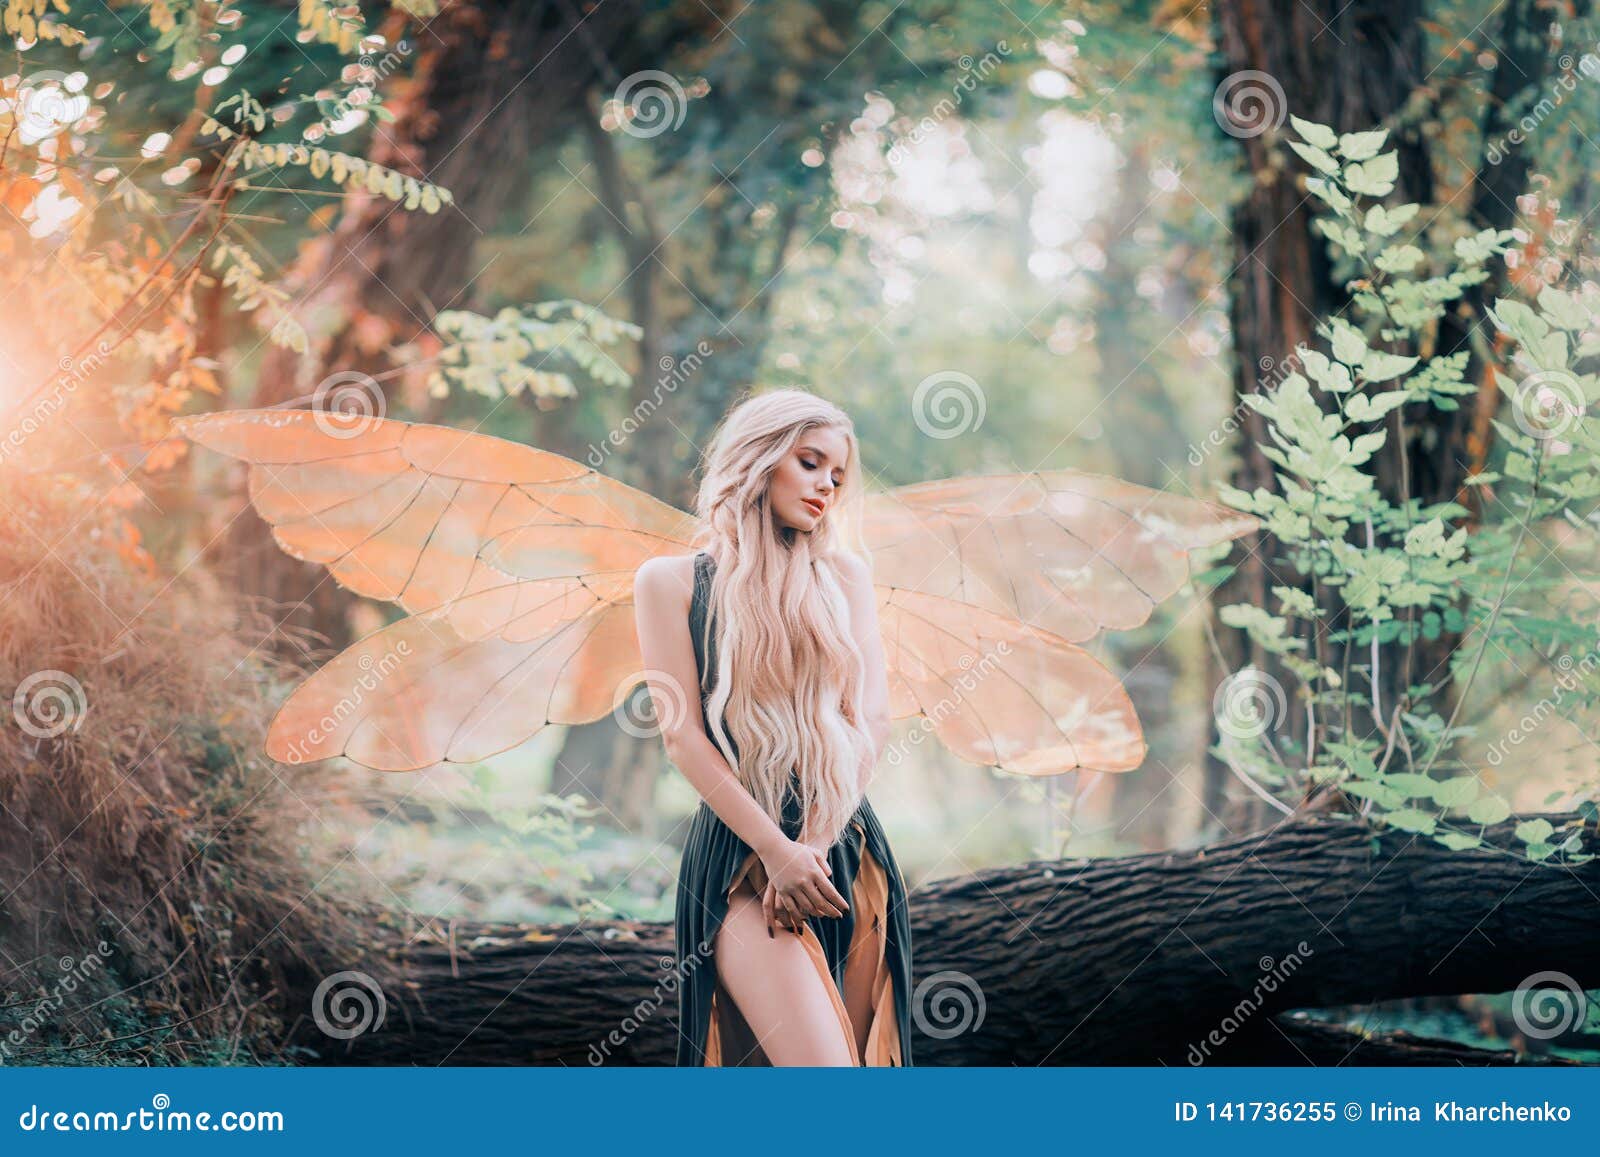 Real Fairy from Magical Stories, Goddess of Nature with ...